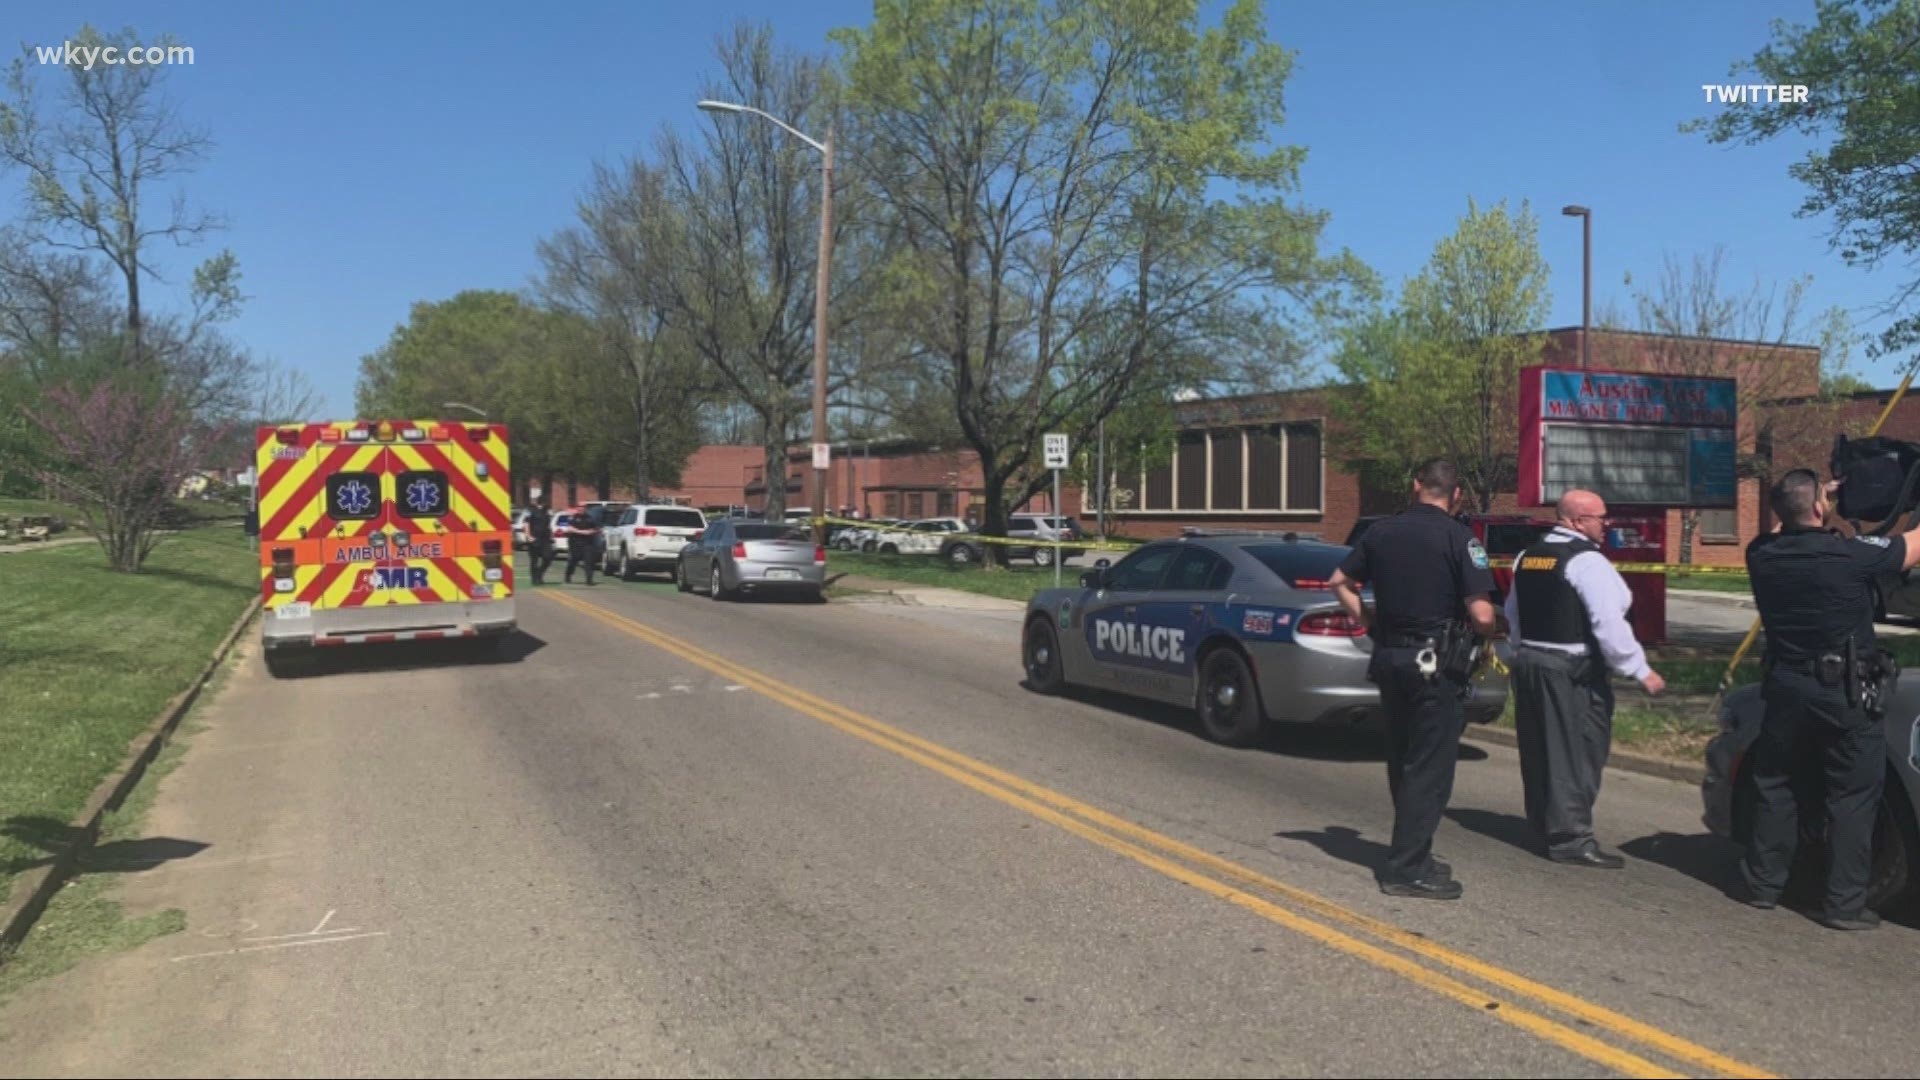 One male was pronounced dead at the school. The KPD officer has non-life threatening injuries.